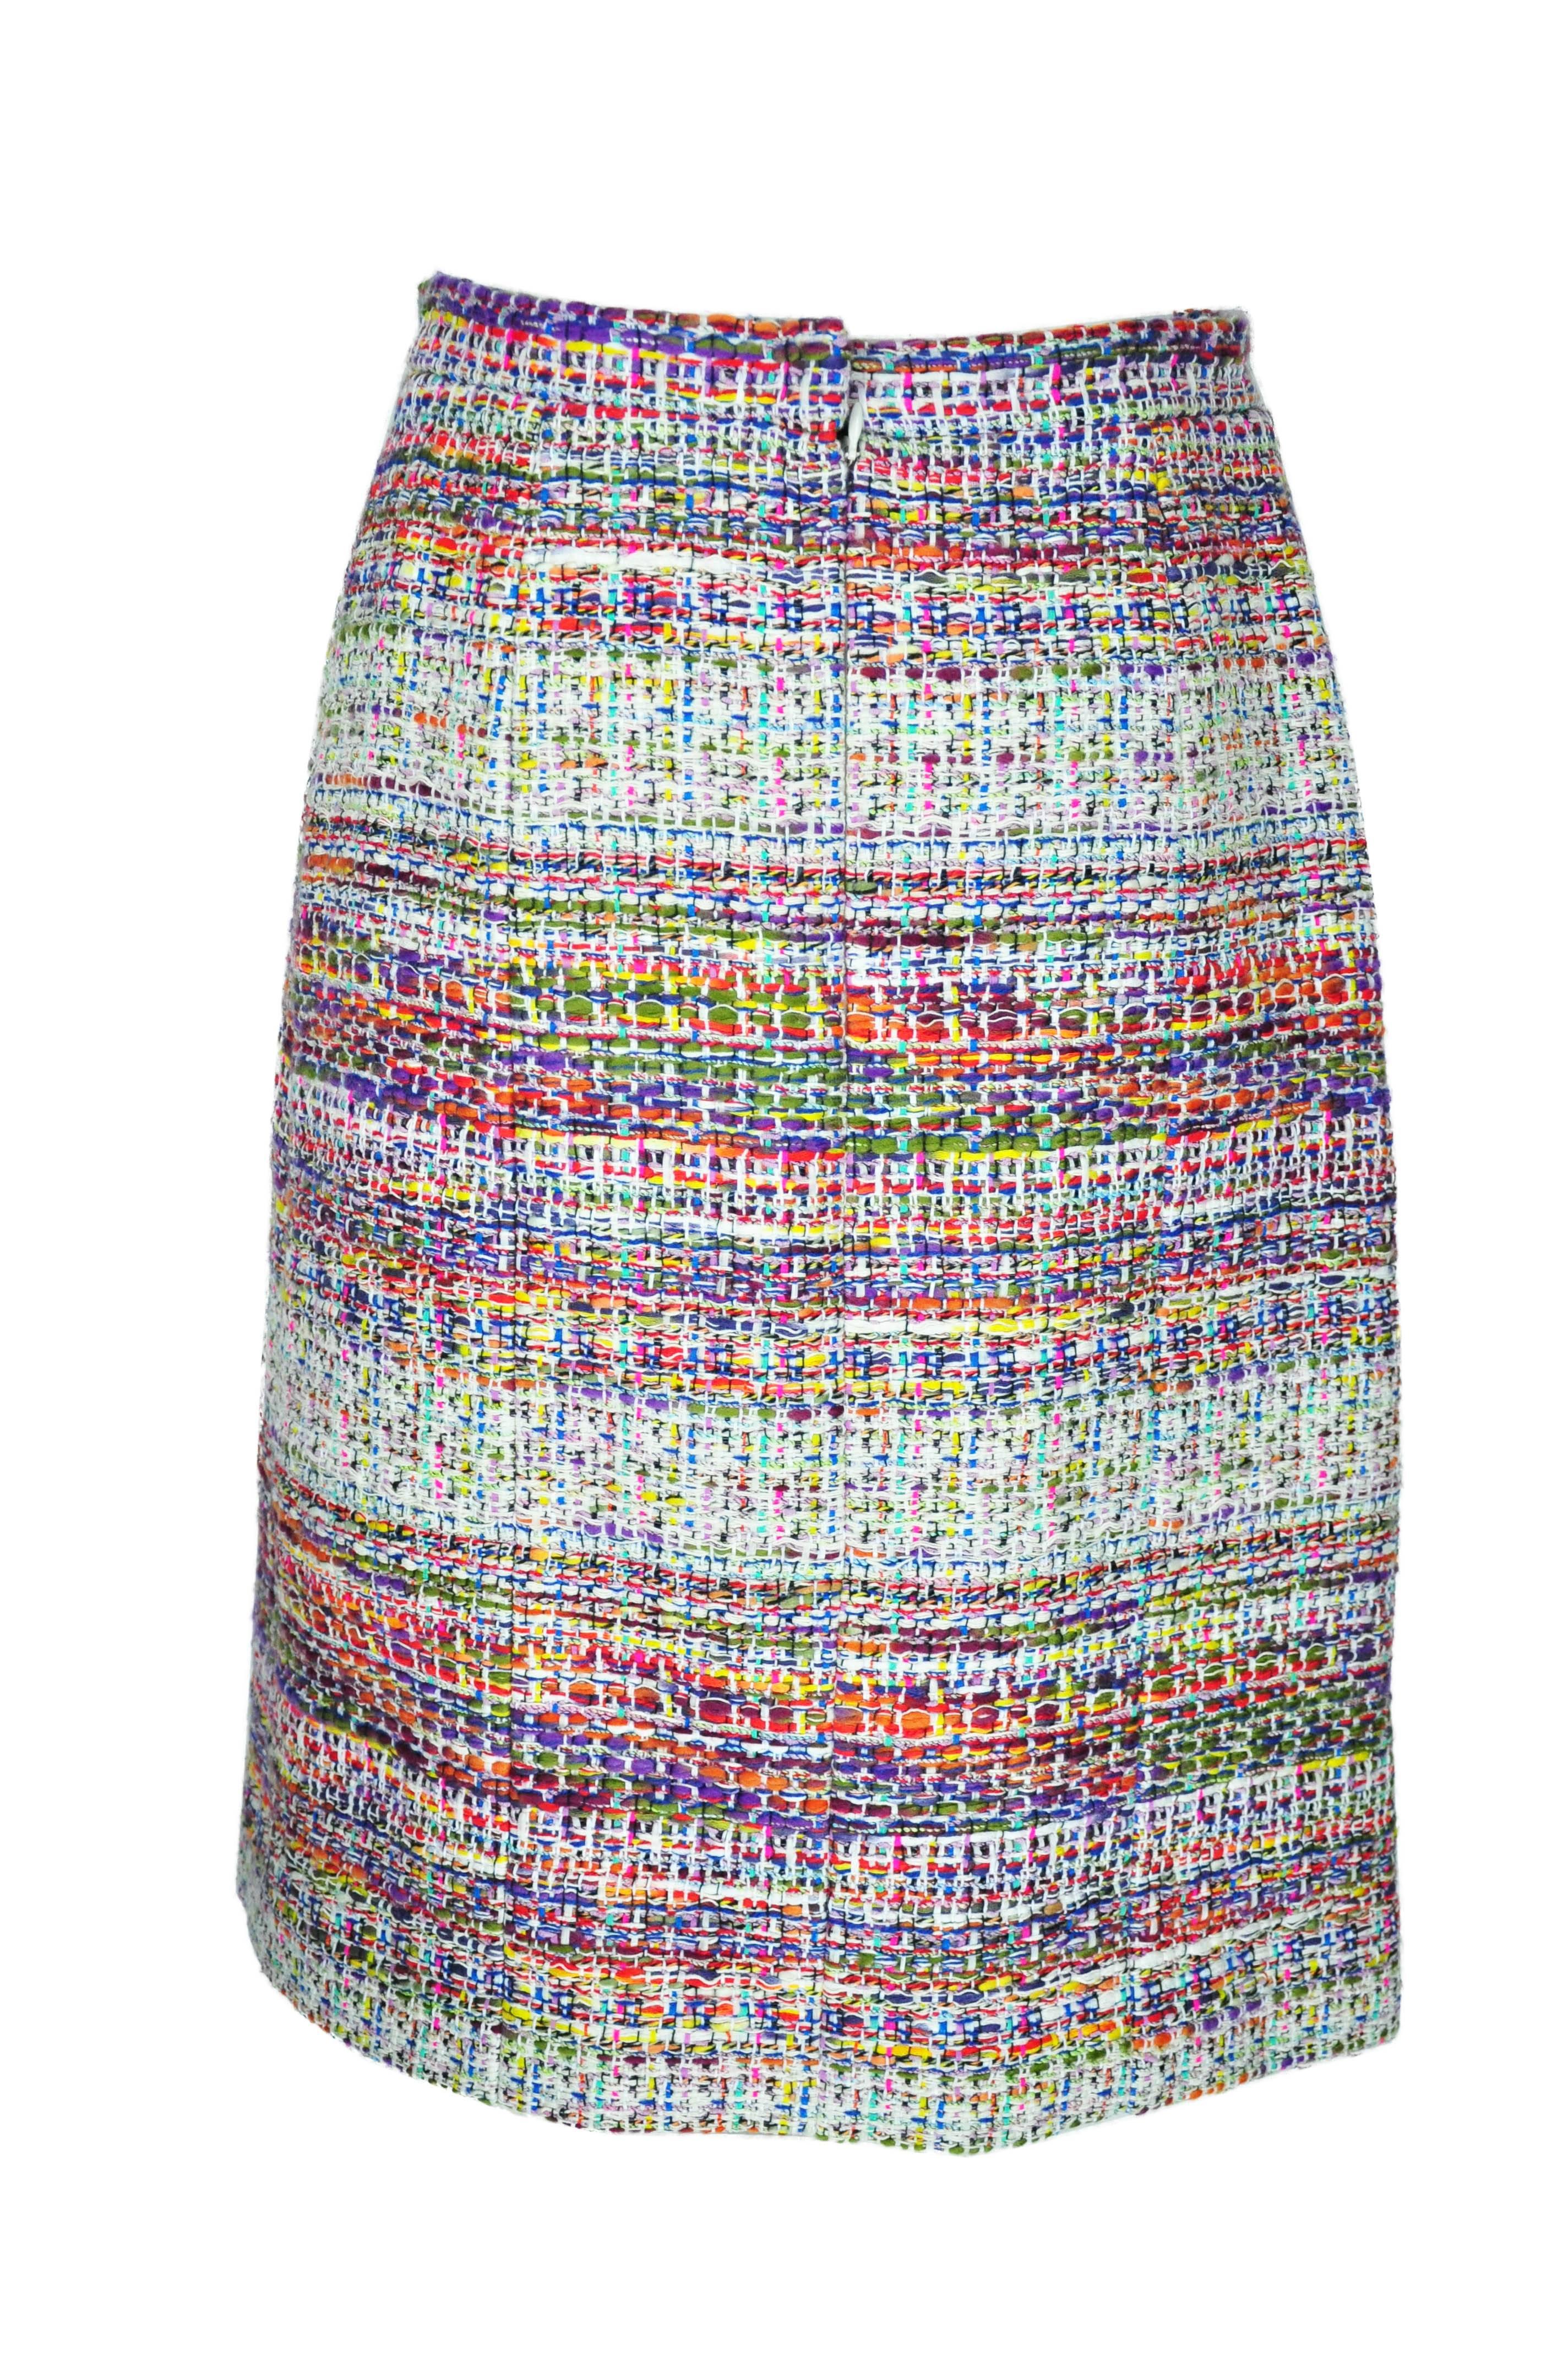 Gray Chanel 2014 F/W Collection Multi-color Fantasy Tweed Skirt FR38 New